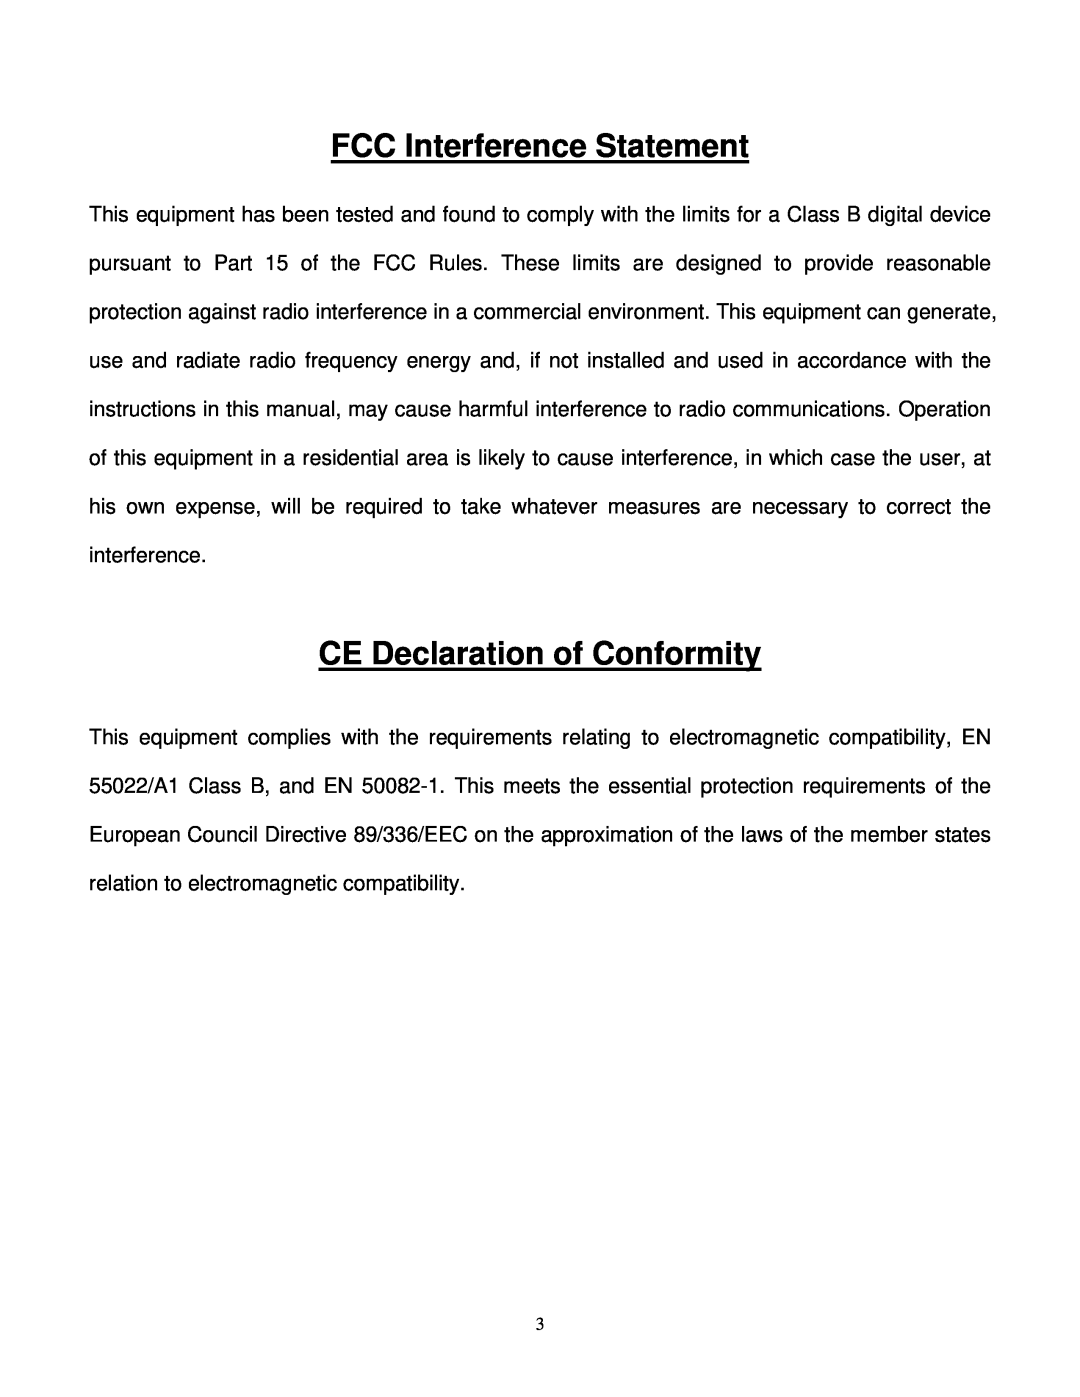 Gigabyte GE 2000-N user manual FCC Interference Statement, CE Declaration of Conformity 